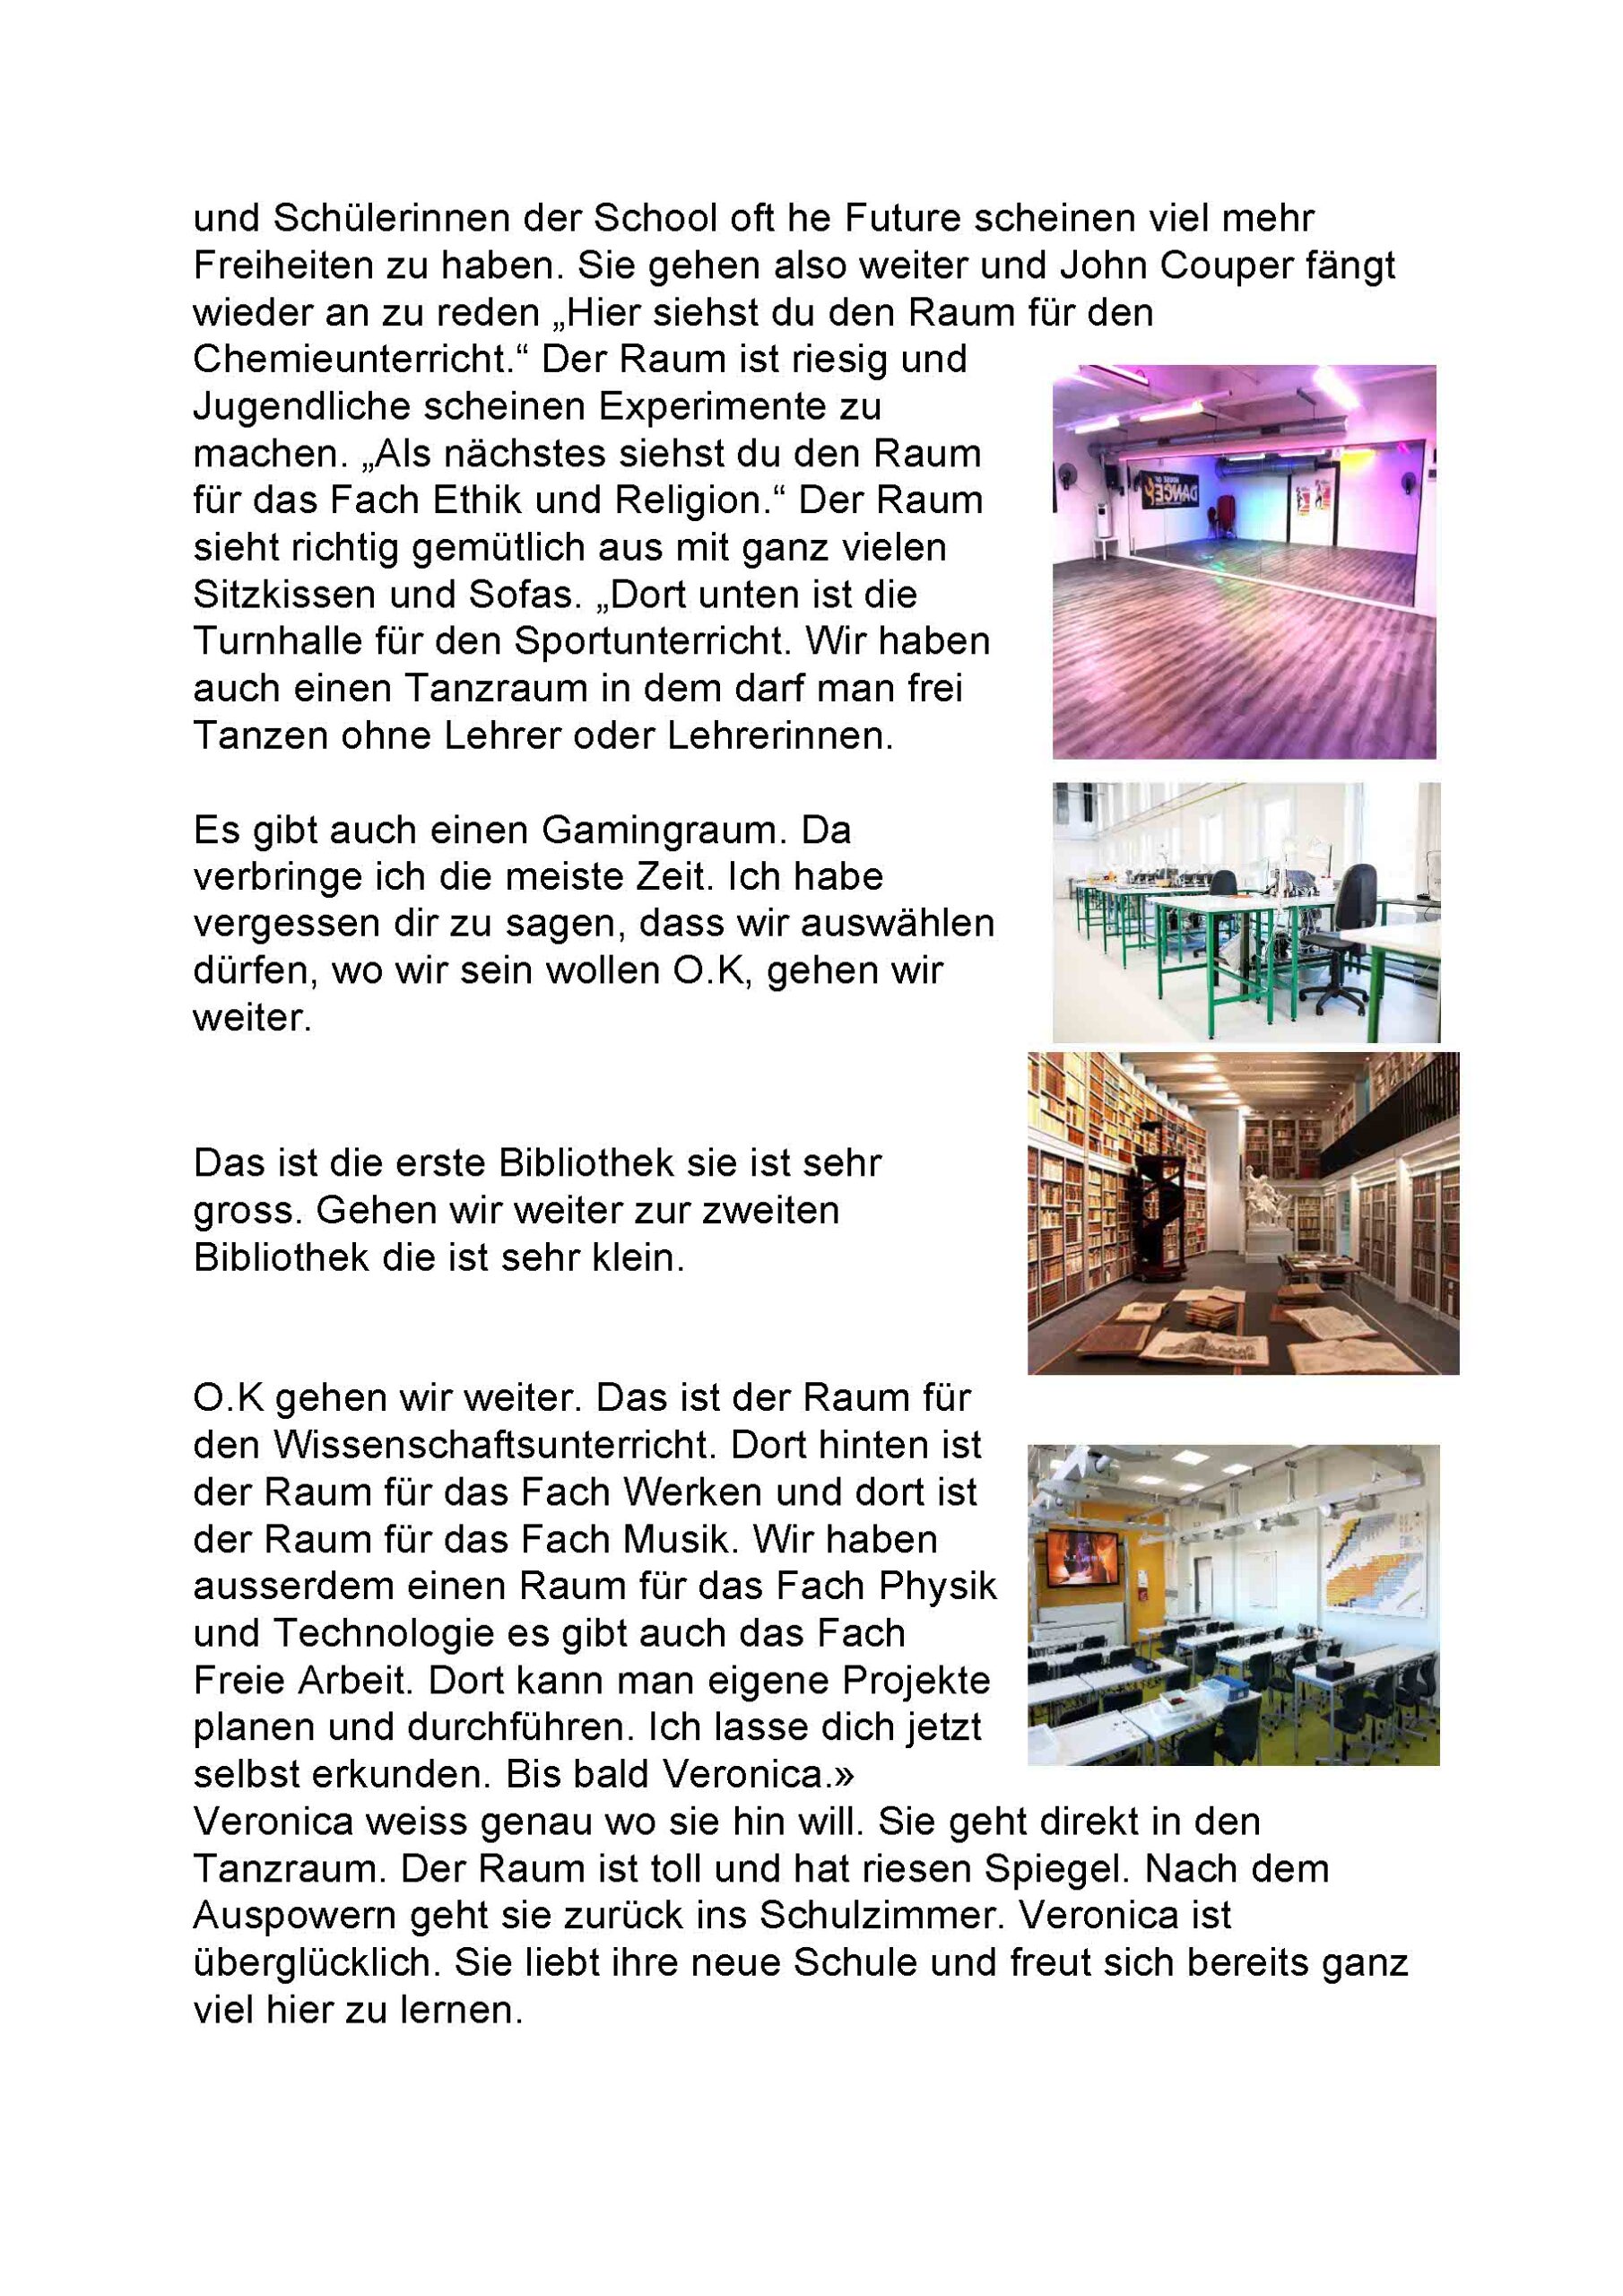 The School of the Future (Beschreibung)_Page_2